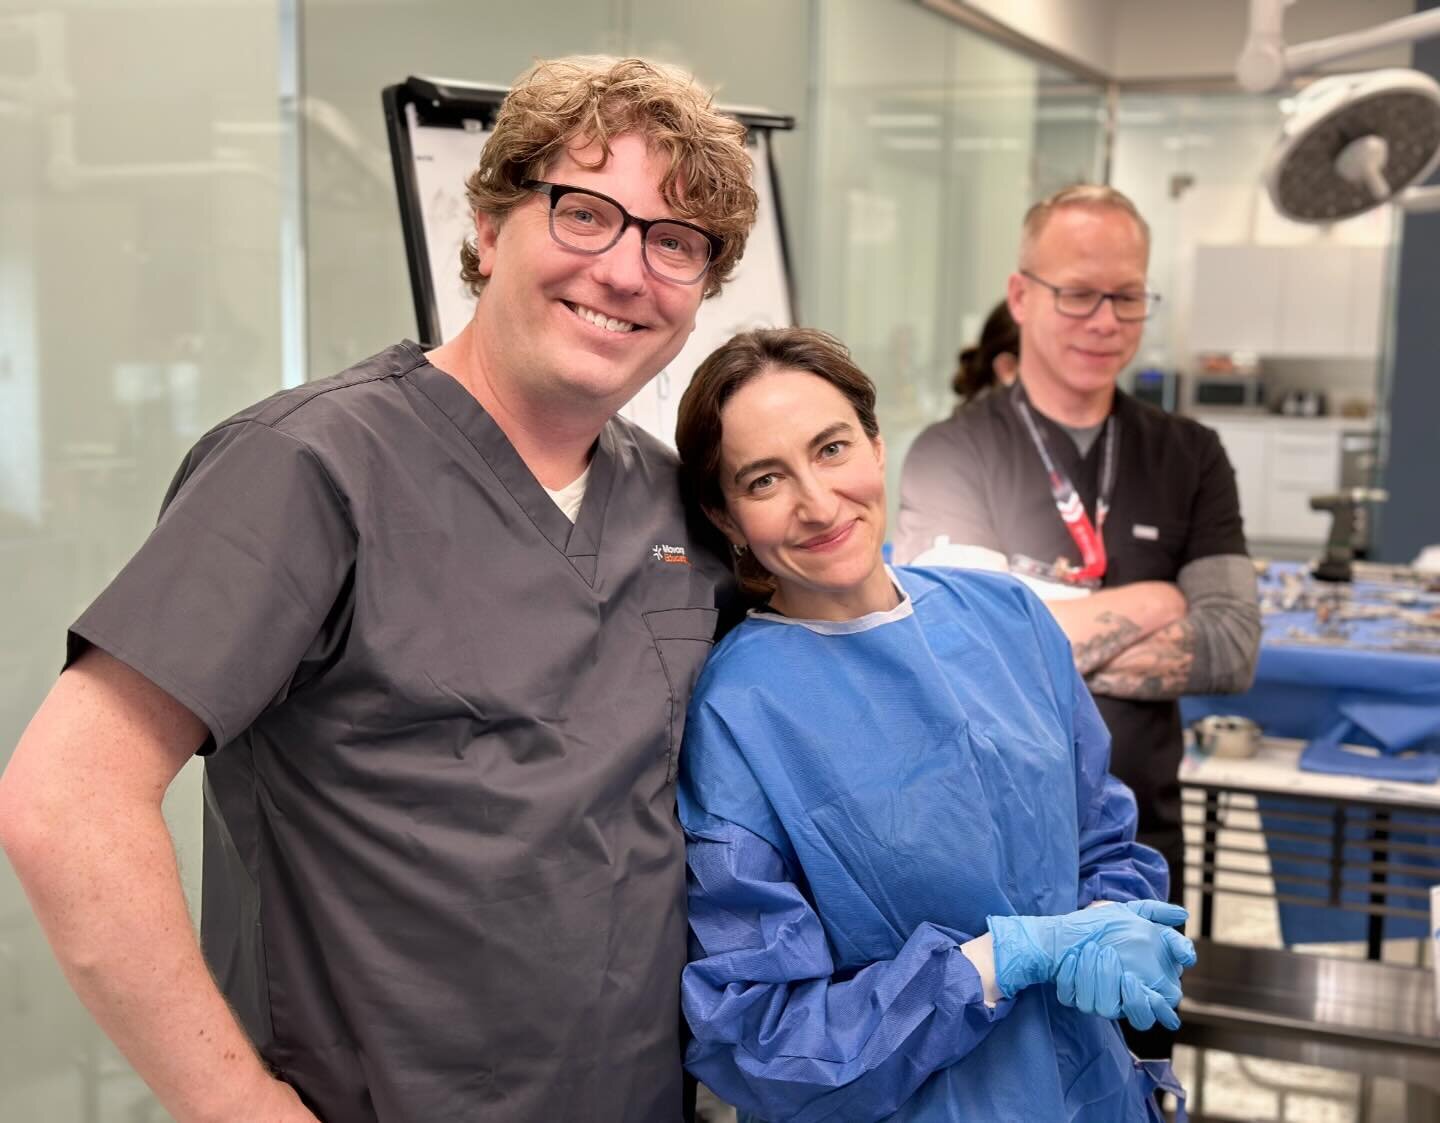 Last weekend, Dr. Kahn teamed up with our friend Dr. Philippa Pavia (a fellow @amcny alum &amp; surgeon!) to teach an introductory course on the Principles of Fracture Repair.

14 specialist &amp; general practitioners from across the country partici